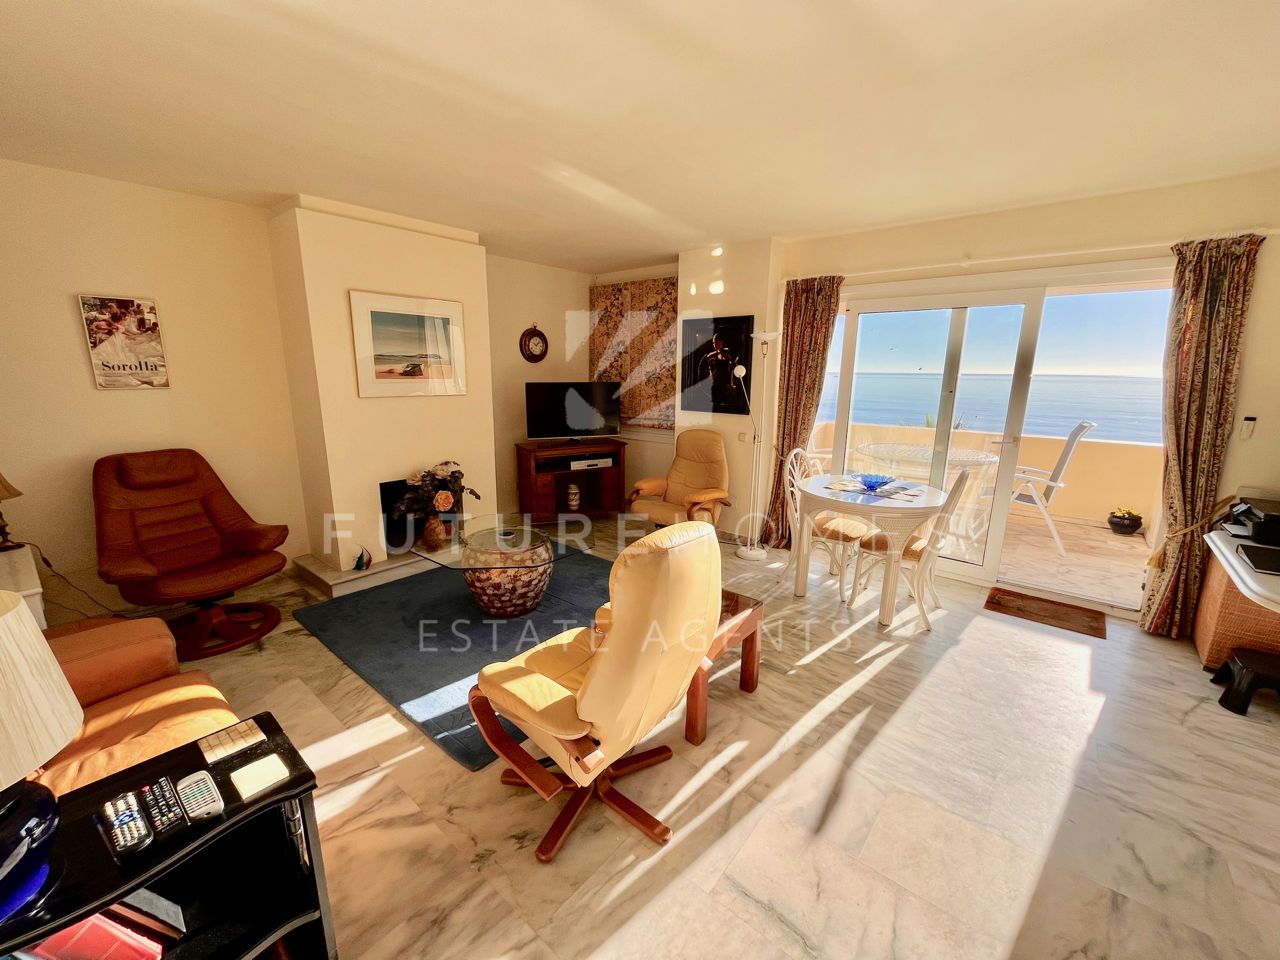 Absolute frontline beach penthouse for sale in Arroyo Vaquero with incredible sea views, Estepona